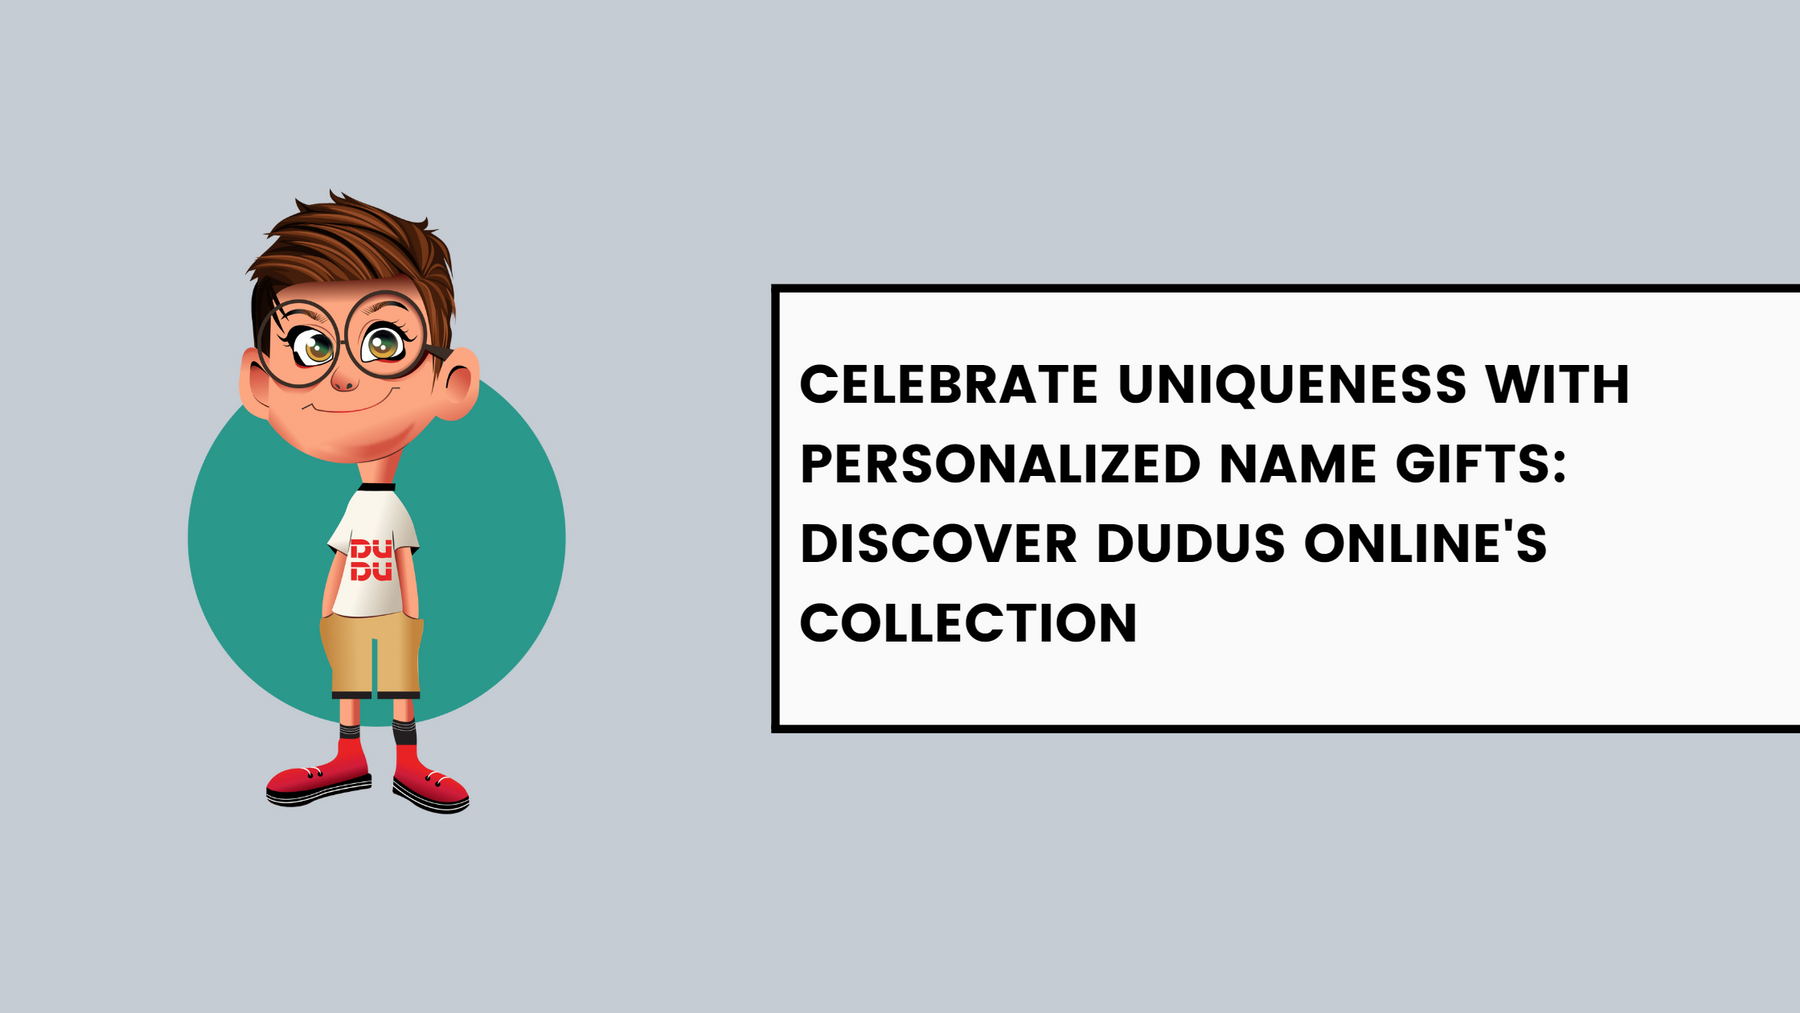 Celebrate Uniqueness with Personalized Name Gifts: Discover Dudus Online's Collection